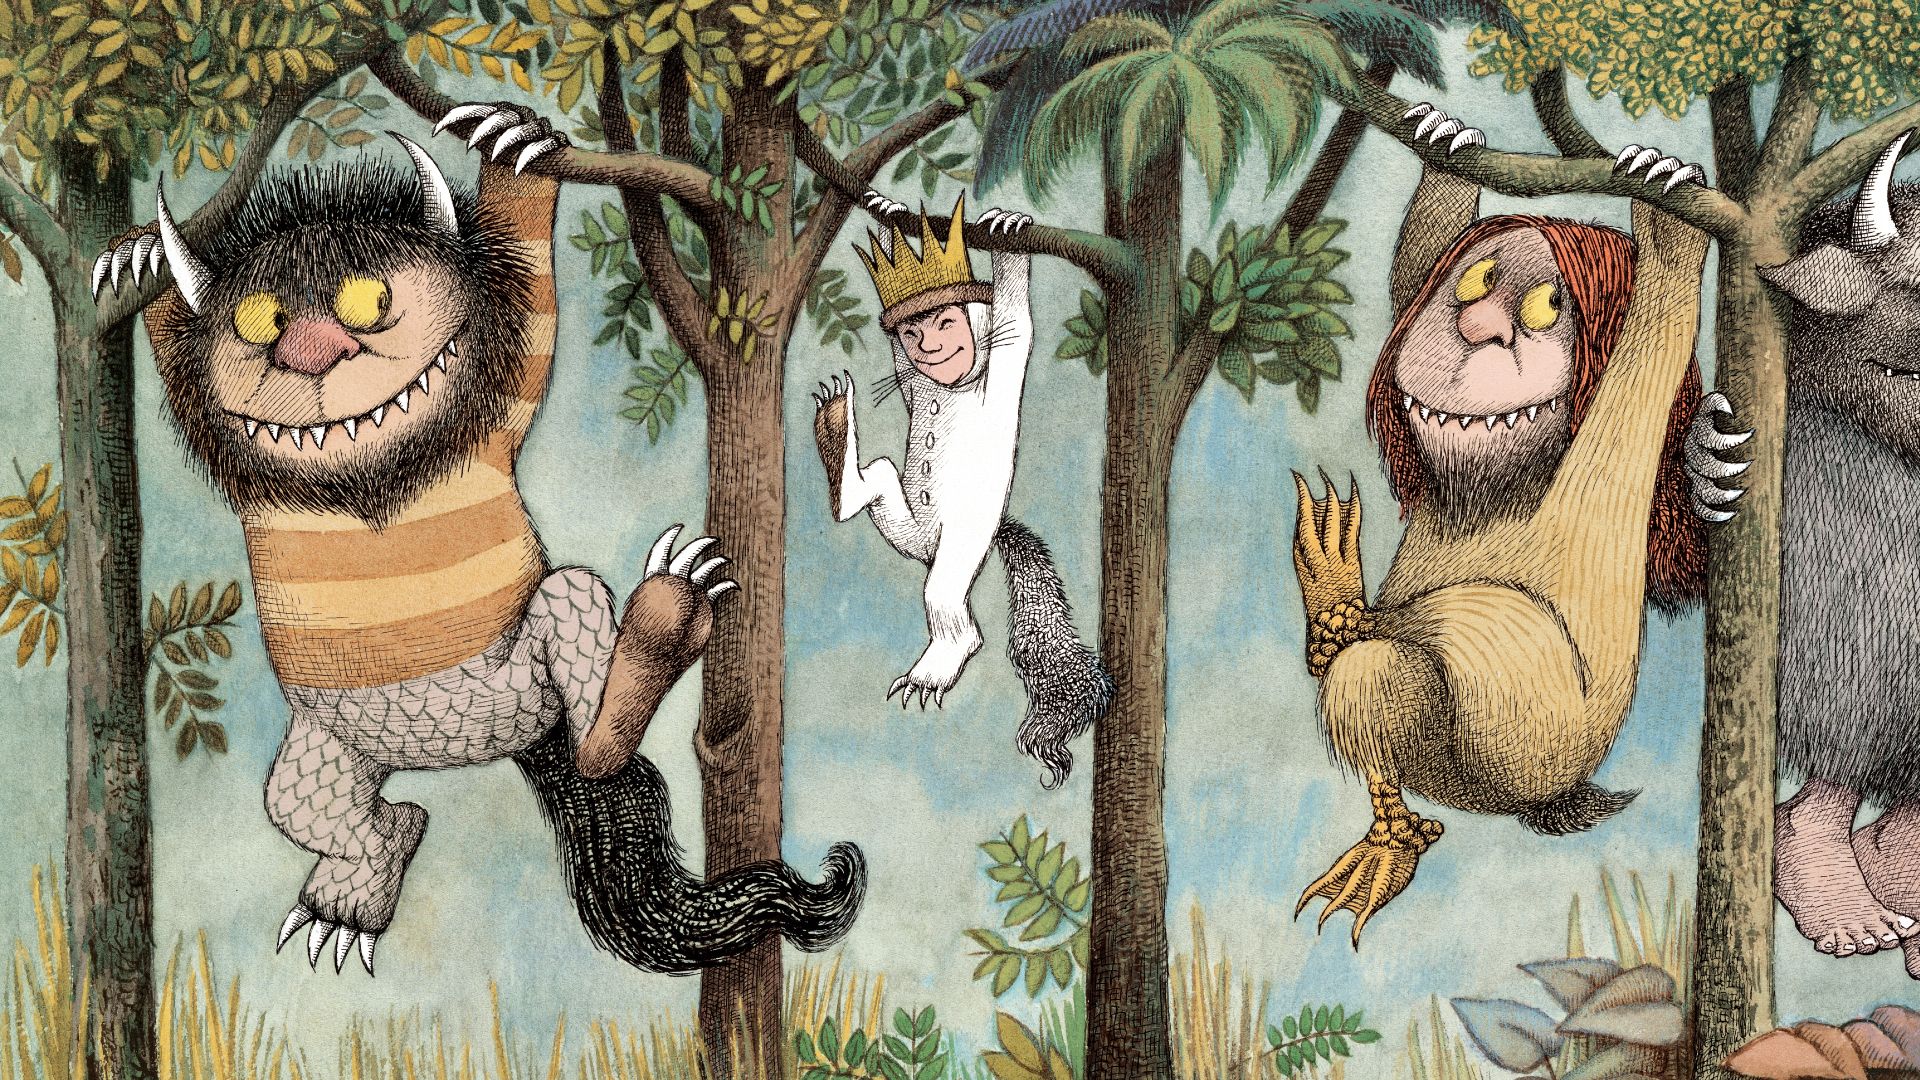 Where the Wild Things Are and Other Notable Works by Maurice Sendak. Toledo Lucas County Public Library